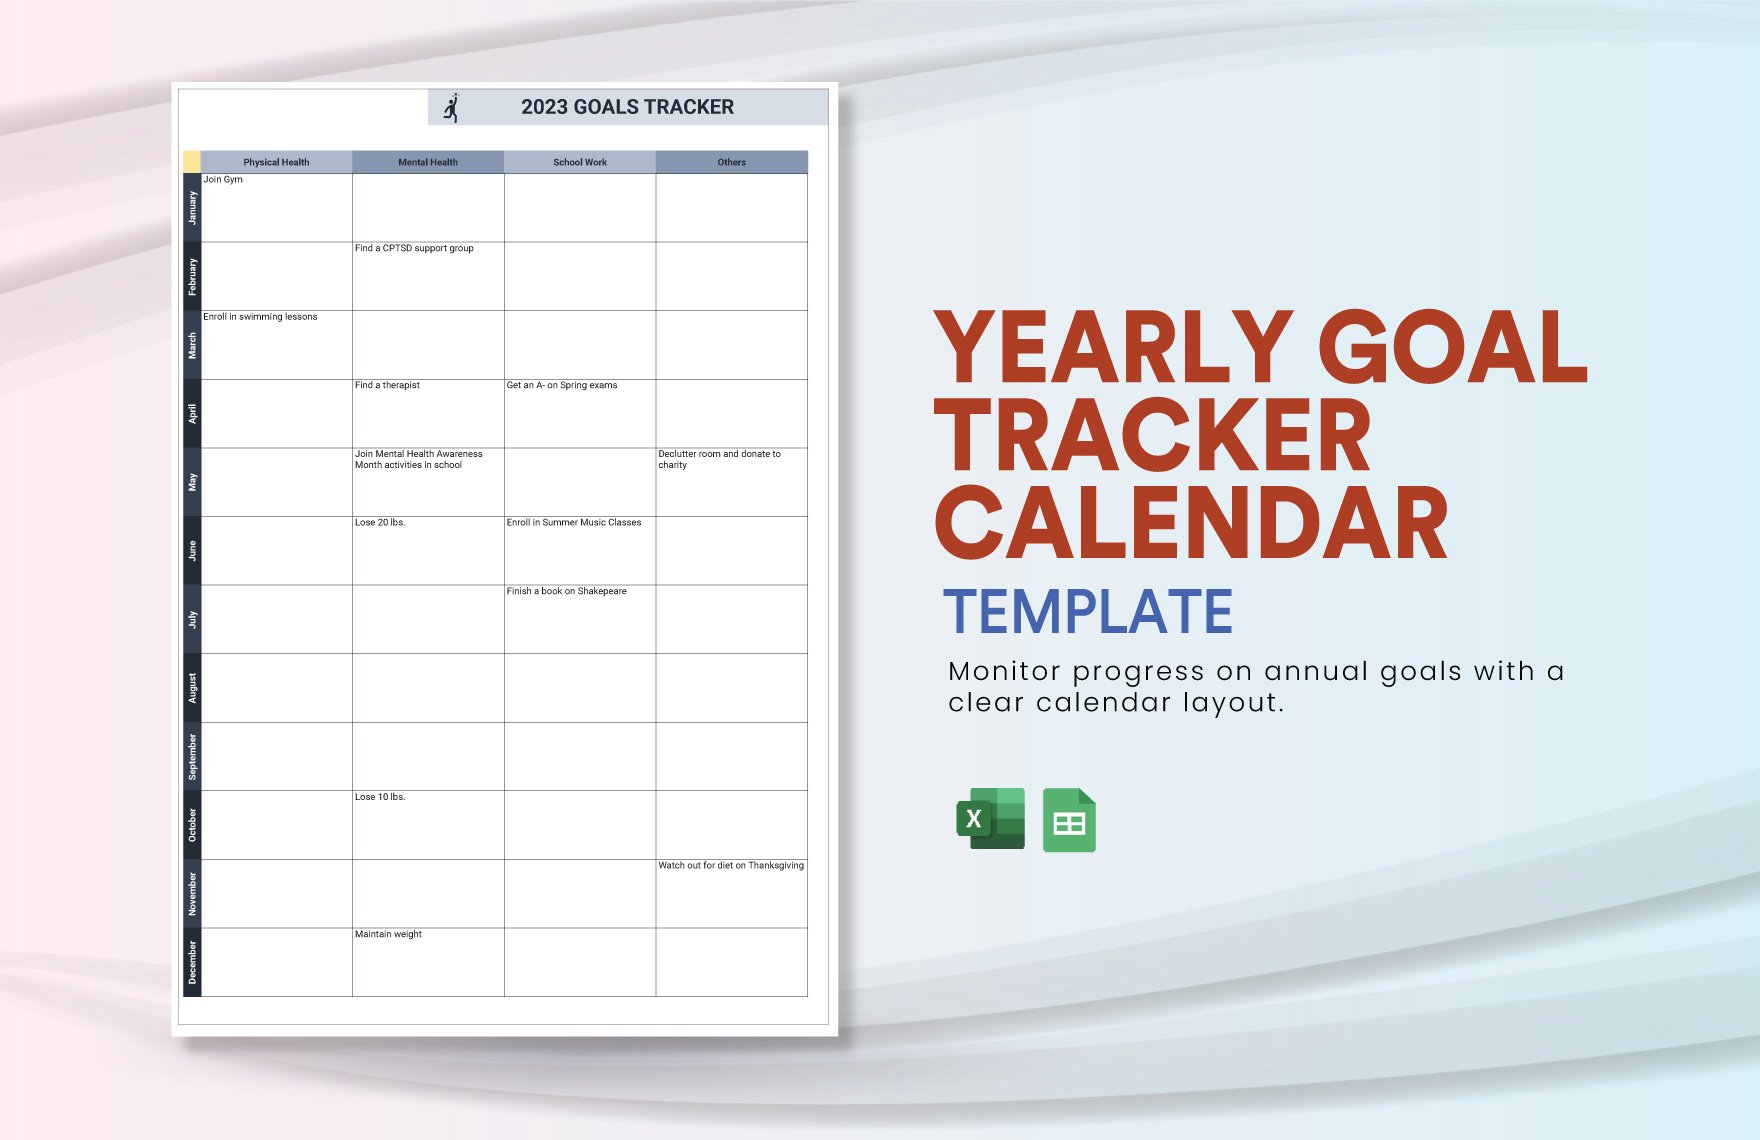 Yearly Goal Tracker Calendar in Excel, Google Sheets